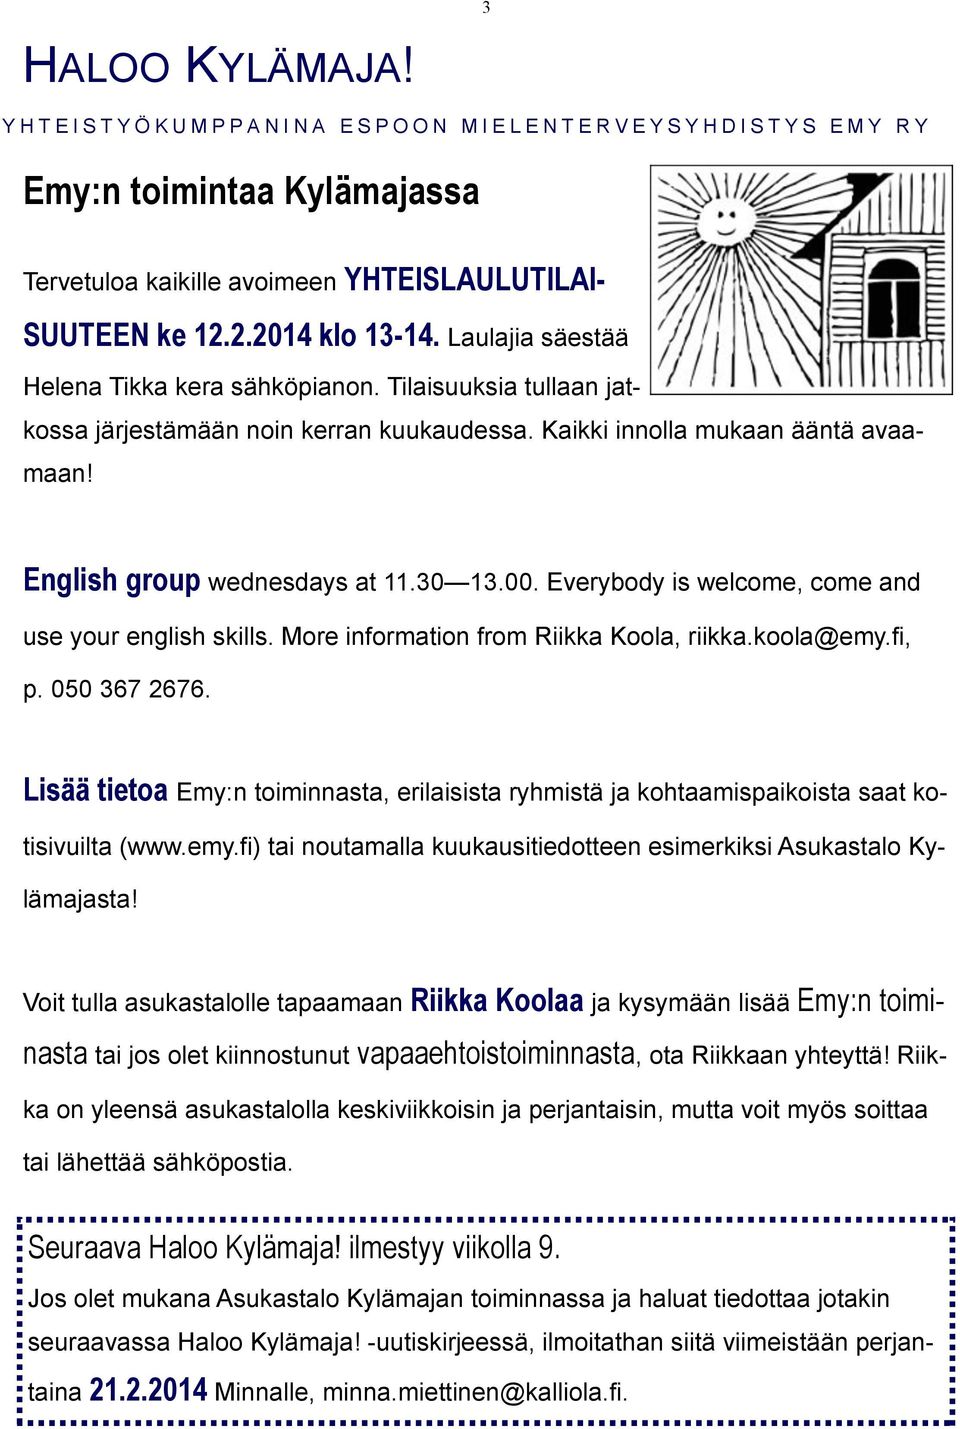 English group wednesdays at 11.30 13.00. Everybody is welcome, come and use your english skills. More information from Riikka Koola, riikka.koola@emy.fi, p. 050 367 2676.